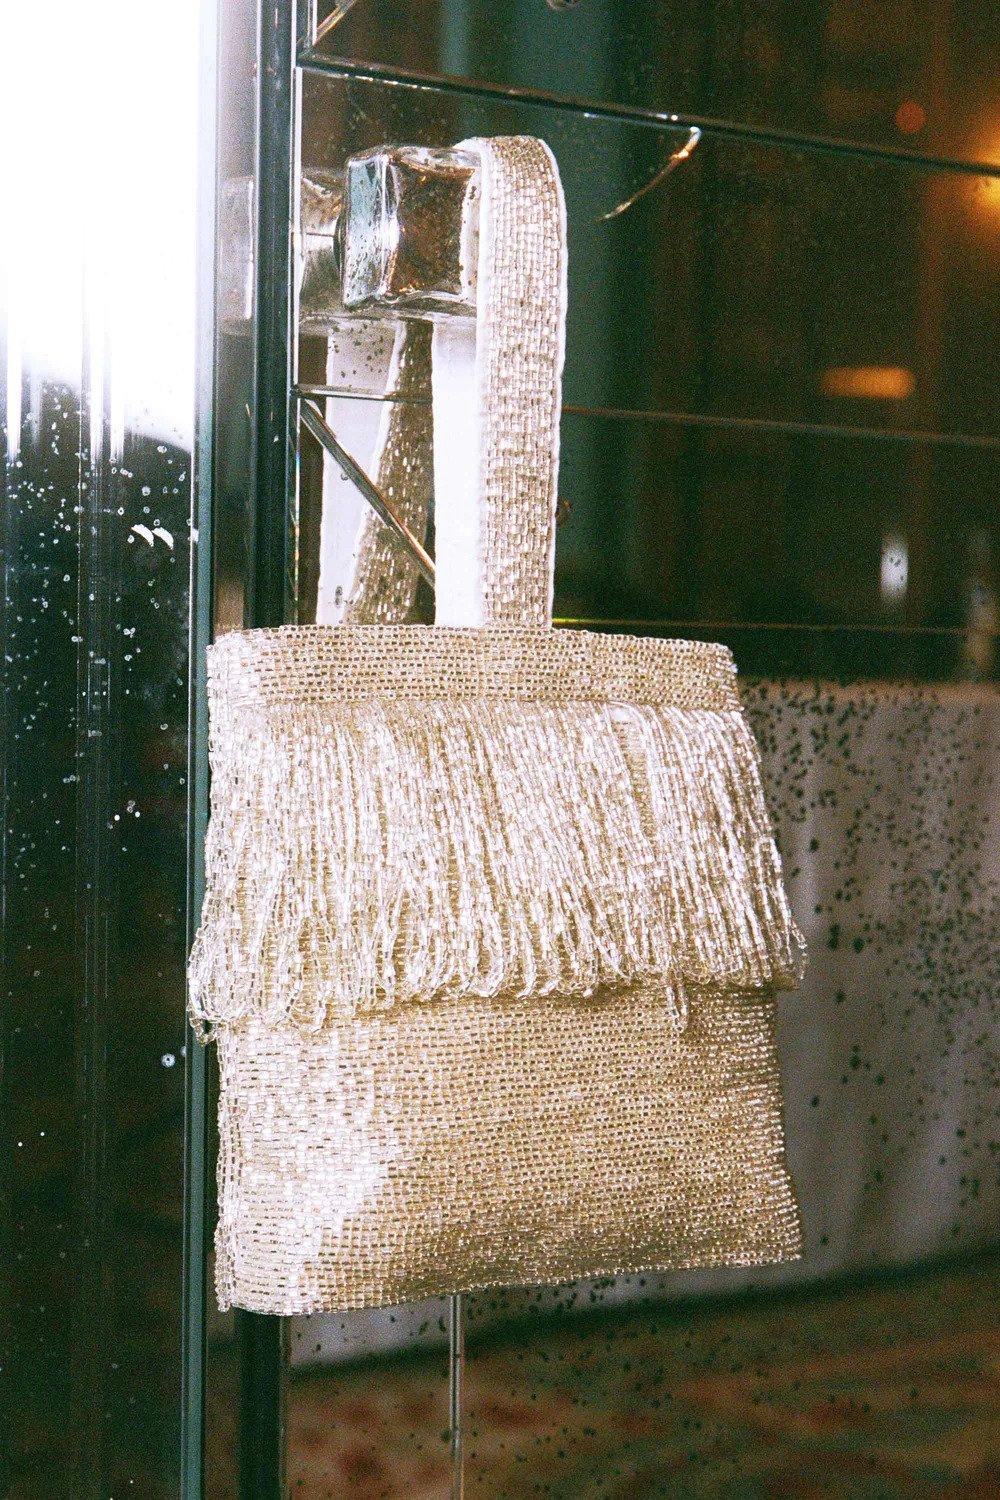 A silver beaded party style bag handing on a rack